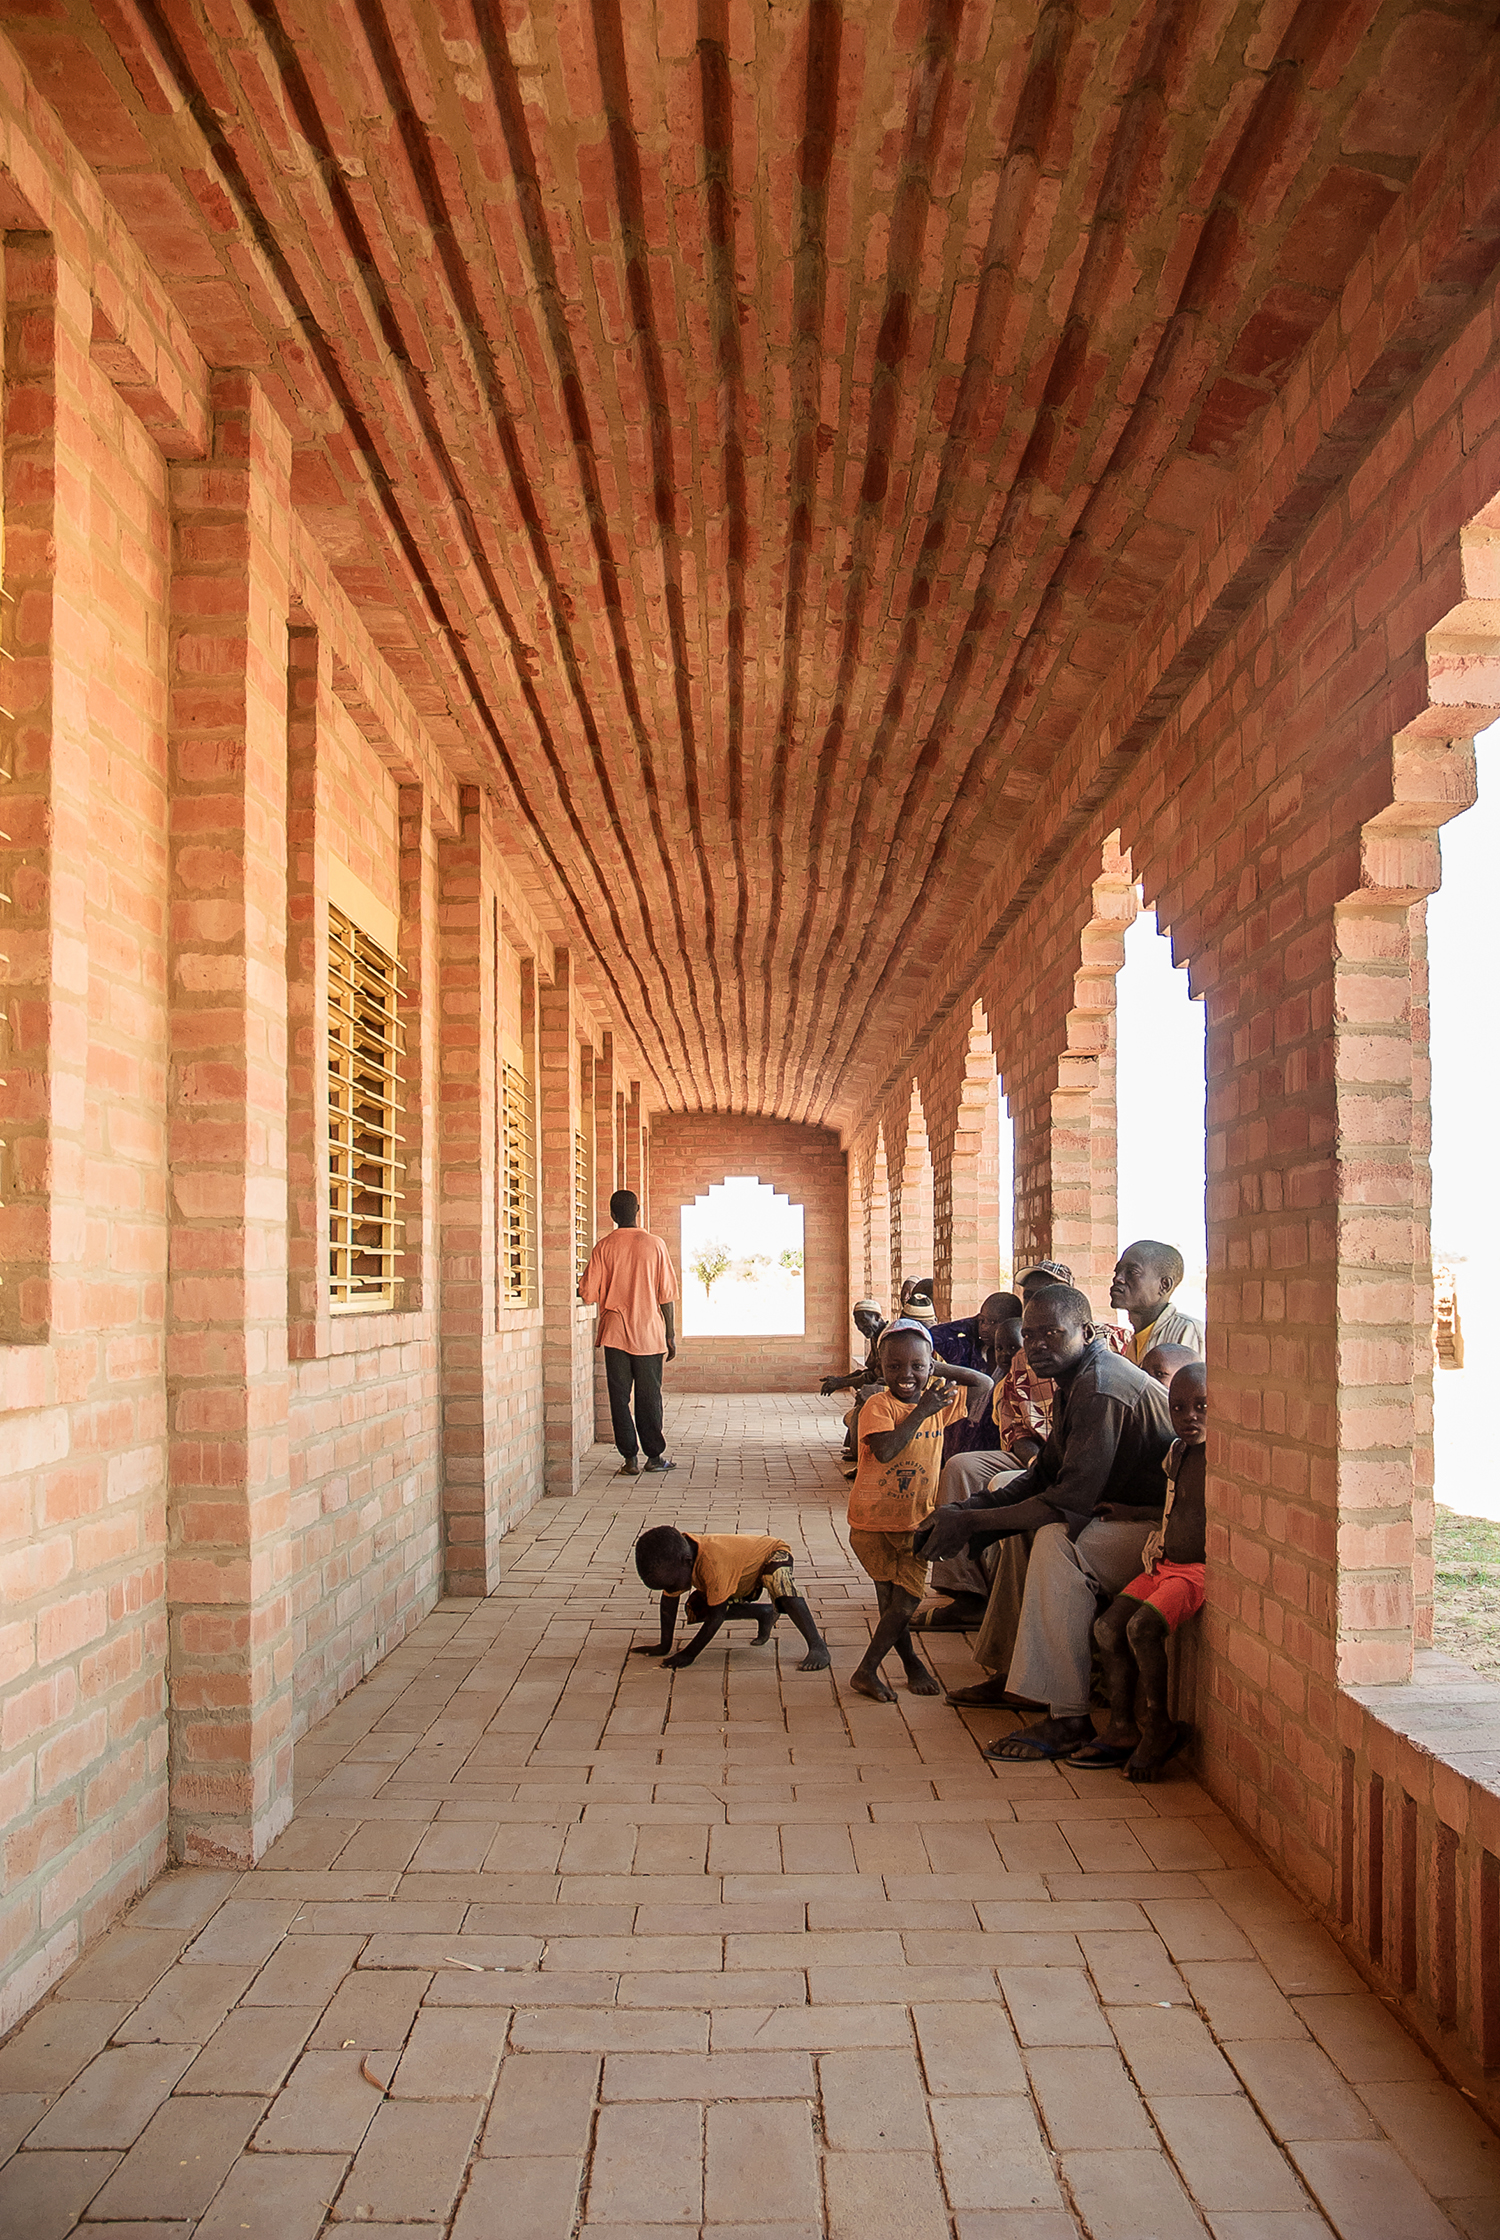 The verandas with their intricate floor pattern and benches establish a meaningful place for the elders of the village community  